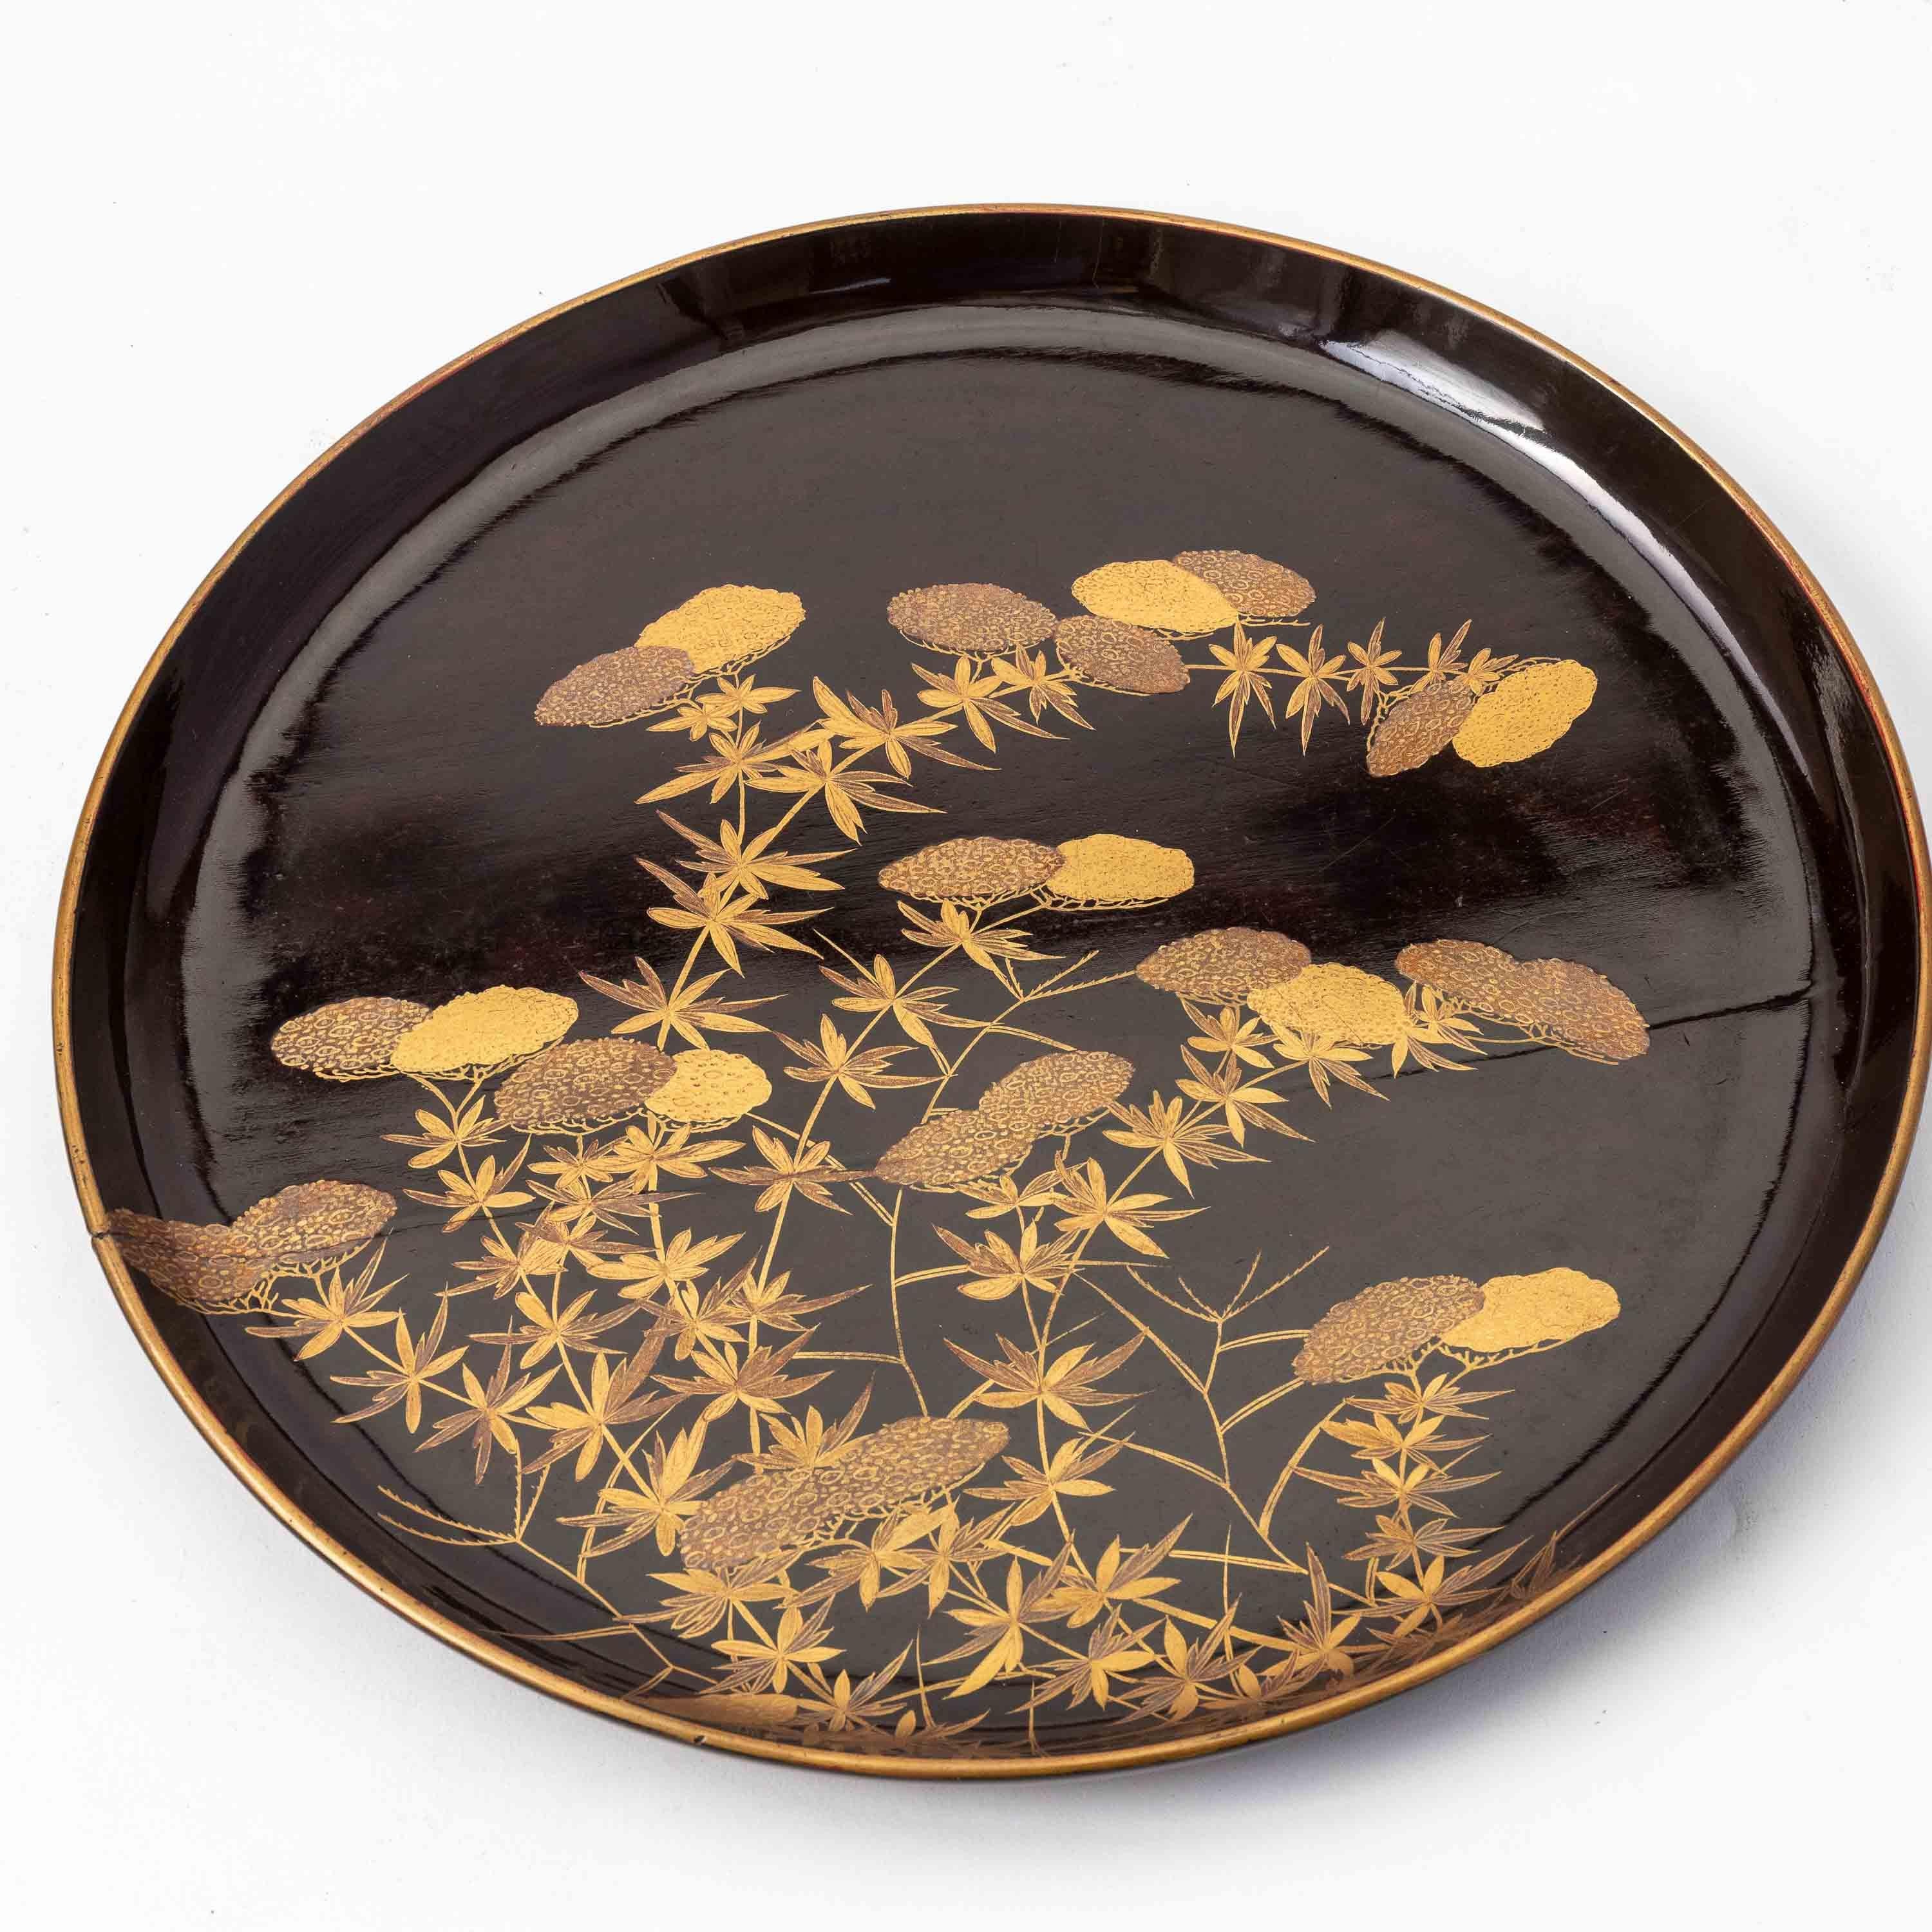 Set of 9 Antique Japanese Circular Lacquer Trays with Botanical Designs in Gold 1